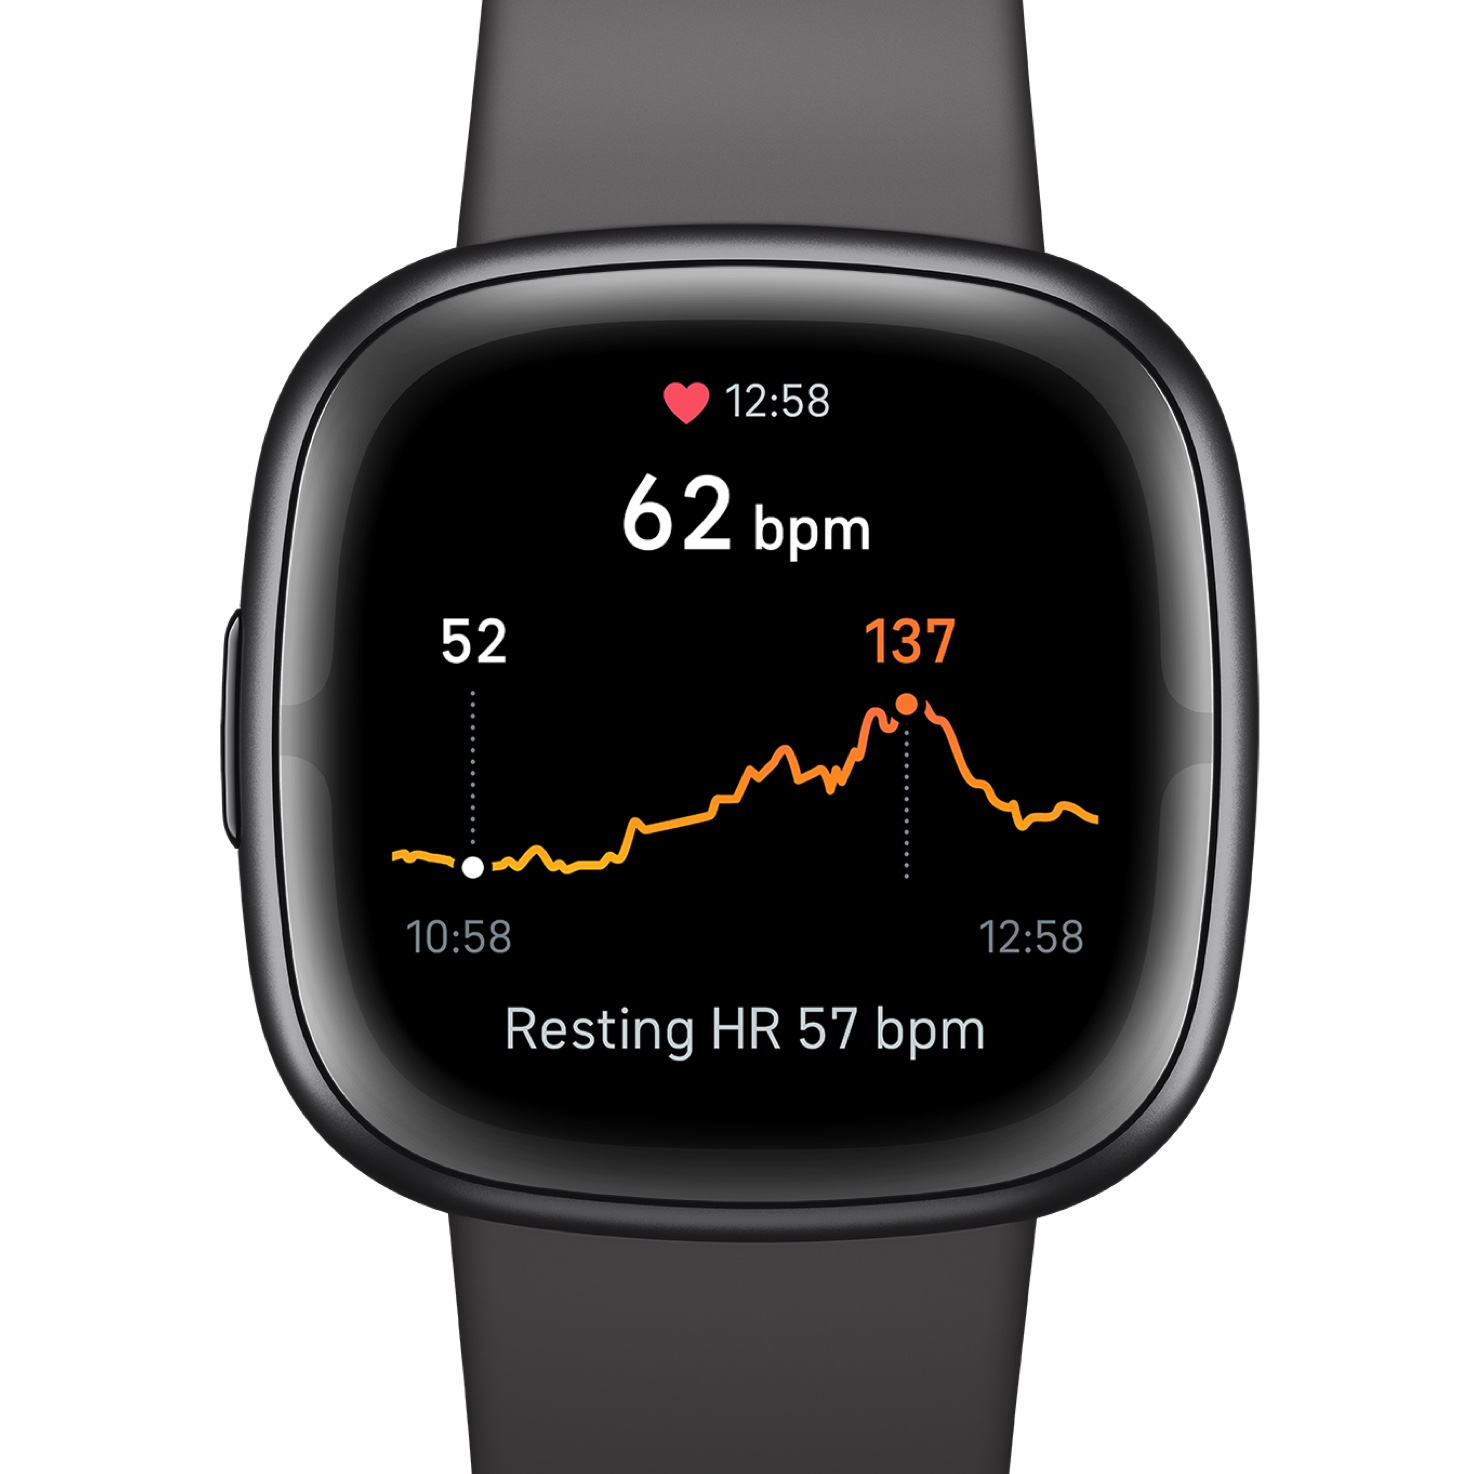 https://www.fitbit.com/global/content/dam/fitbit/global/marketing-pages/technology/heart-rate/desktop/carousel-image-hr-tracking-everyday.jpg